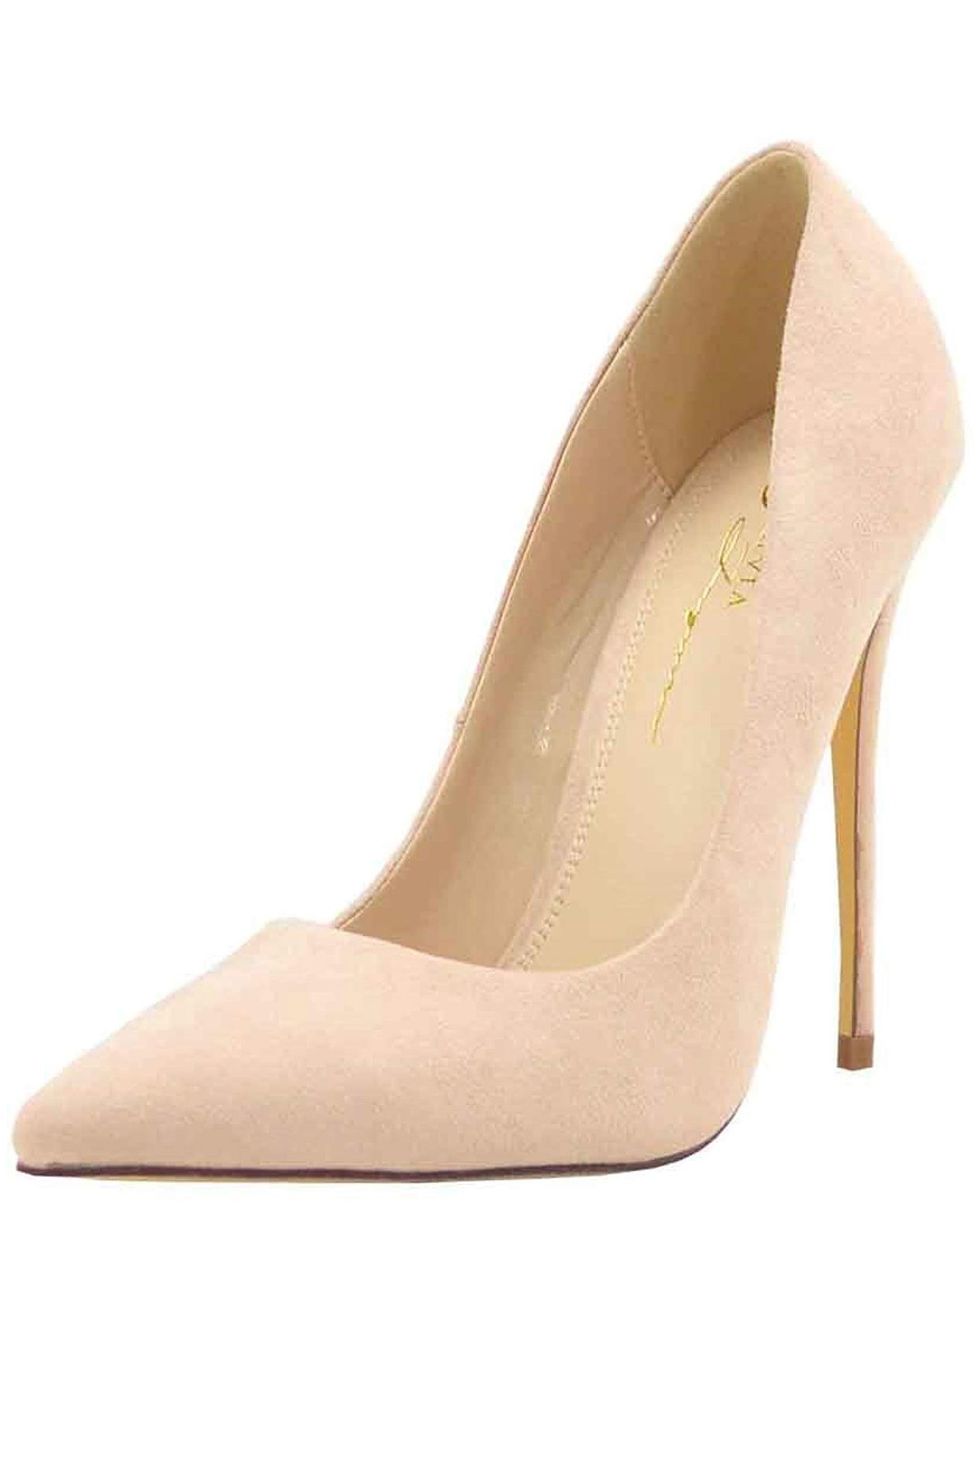 Olivia Jaymes Women's Dress Pump | Pointy Toe Curved Vamp | Slimmed-Down Stiletto Thin Heel Slip-on Pumps (9, Nude)